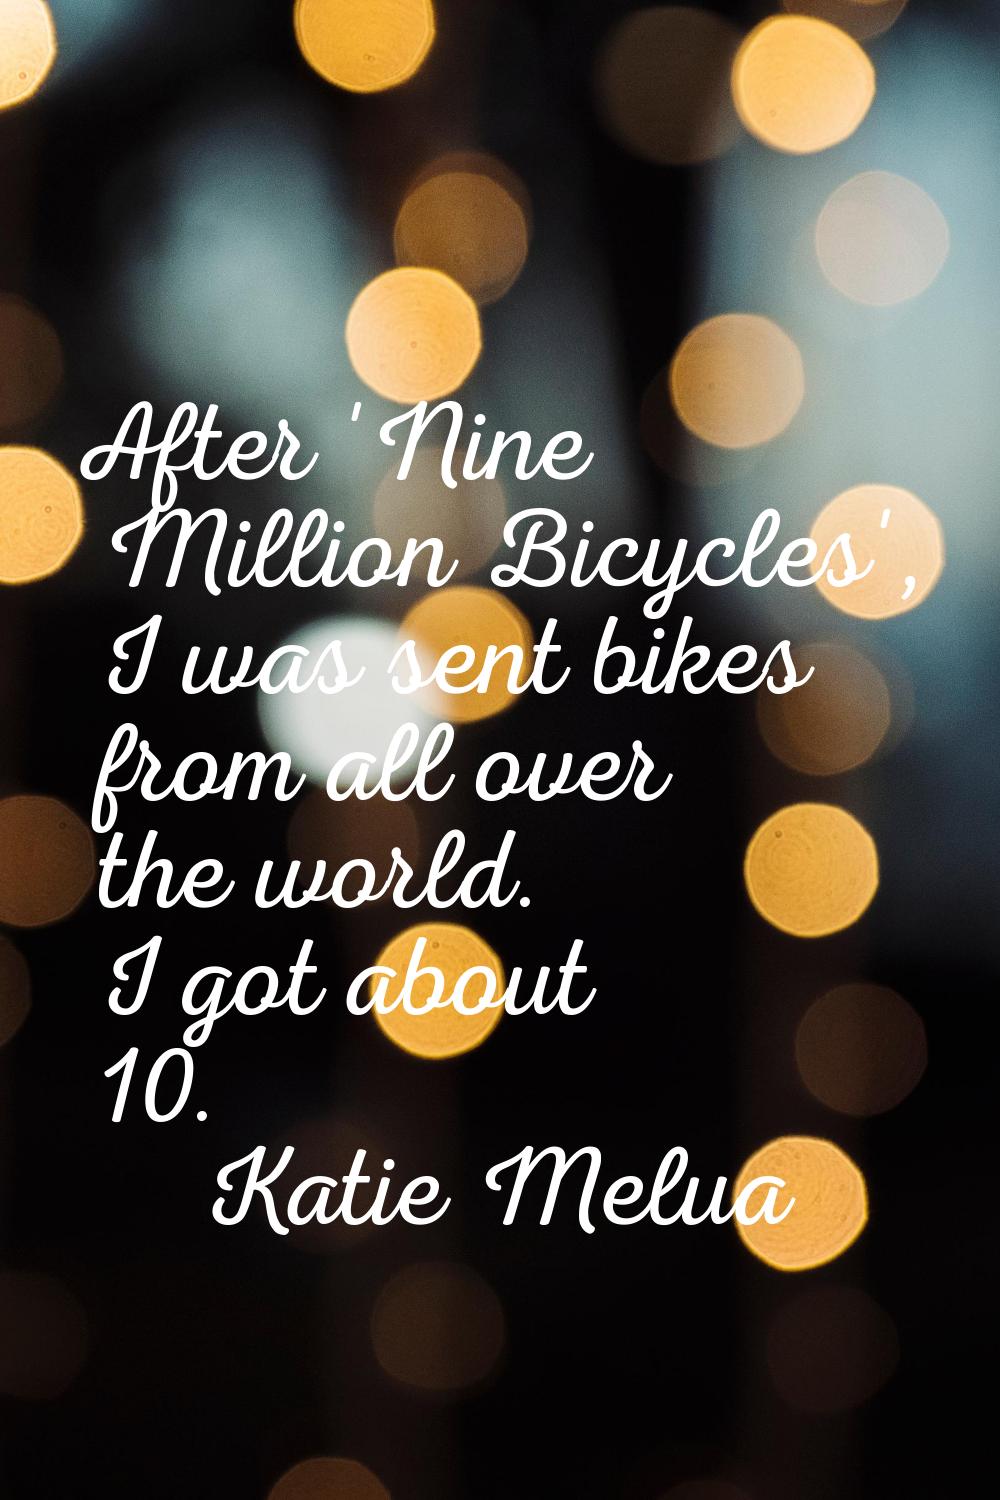 After 'Nine Million Bicycles', I was sent bikes from all over the world. I got about 10.